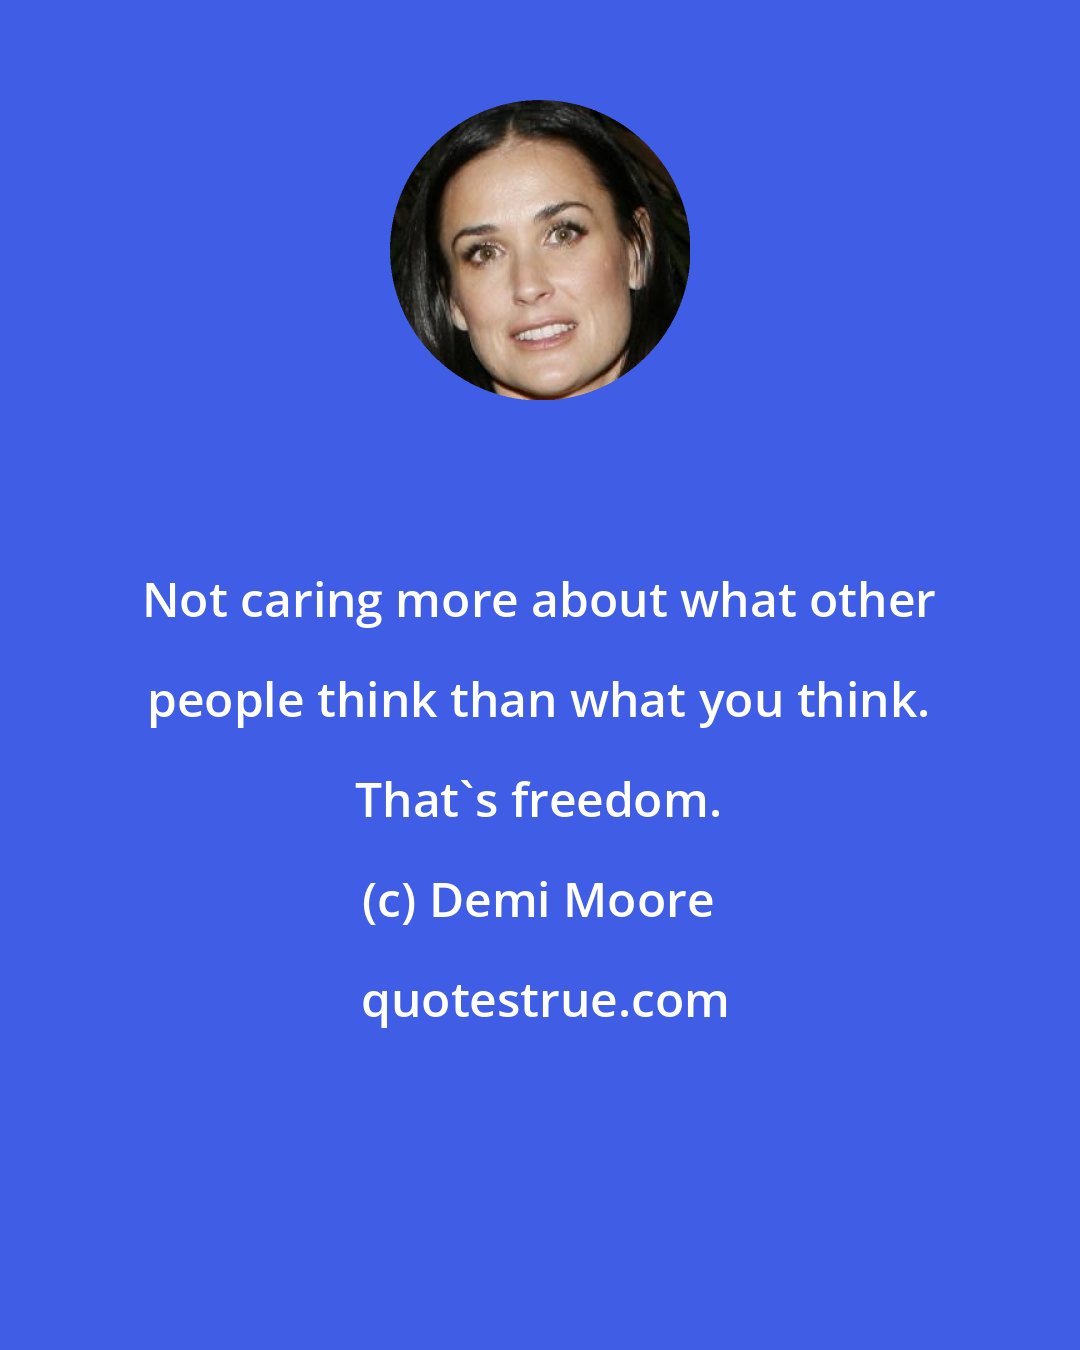 Demi Moore: Not caring more about what other people think than what you think. That's freedom.